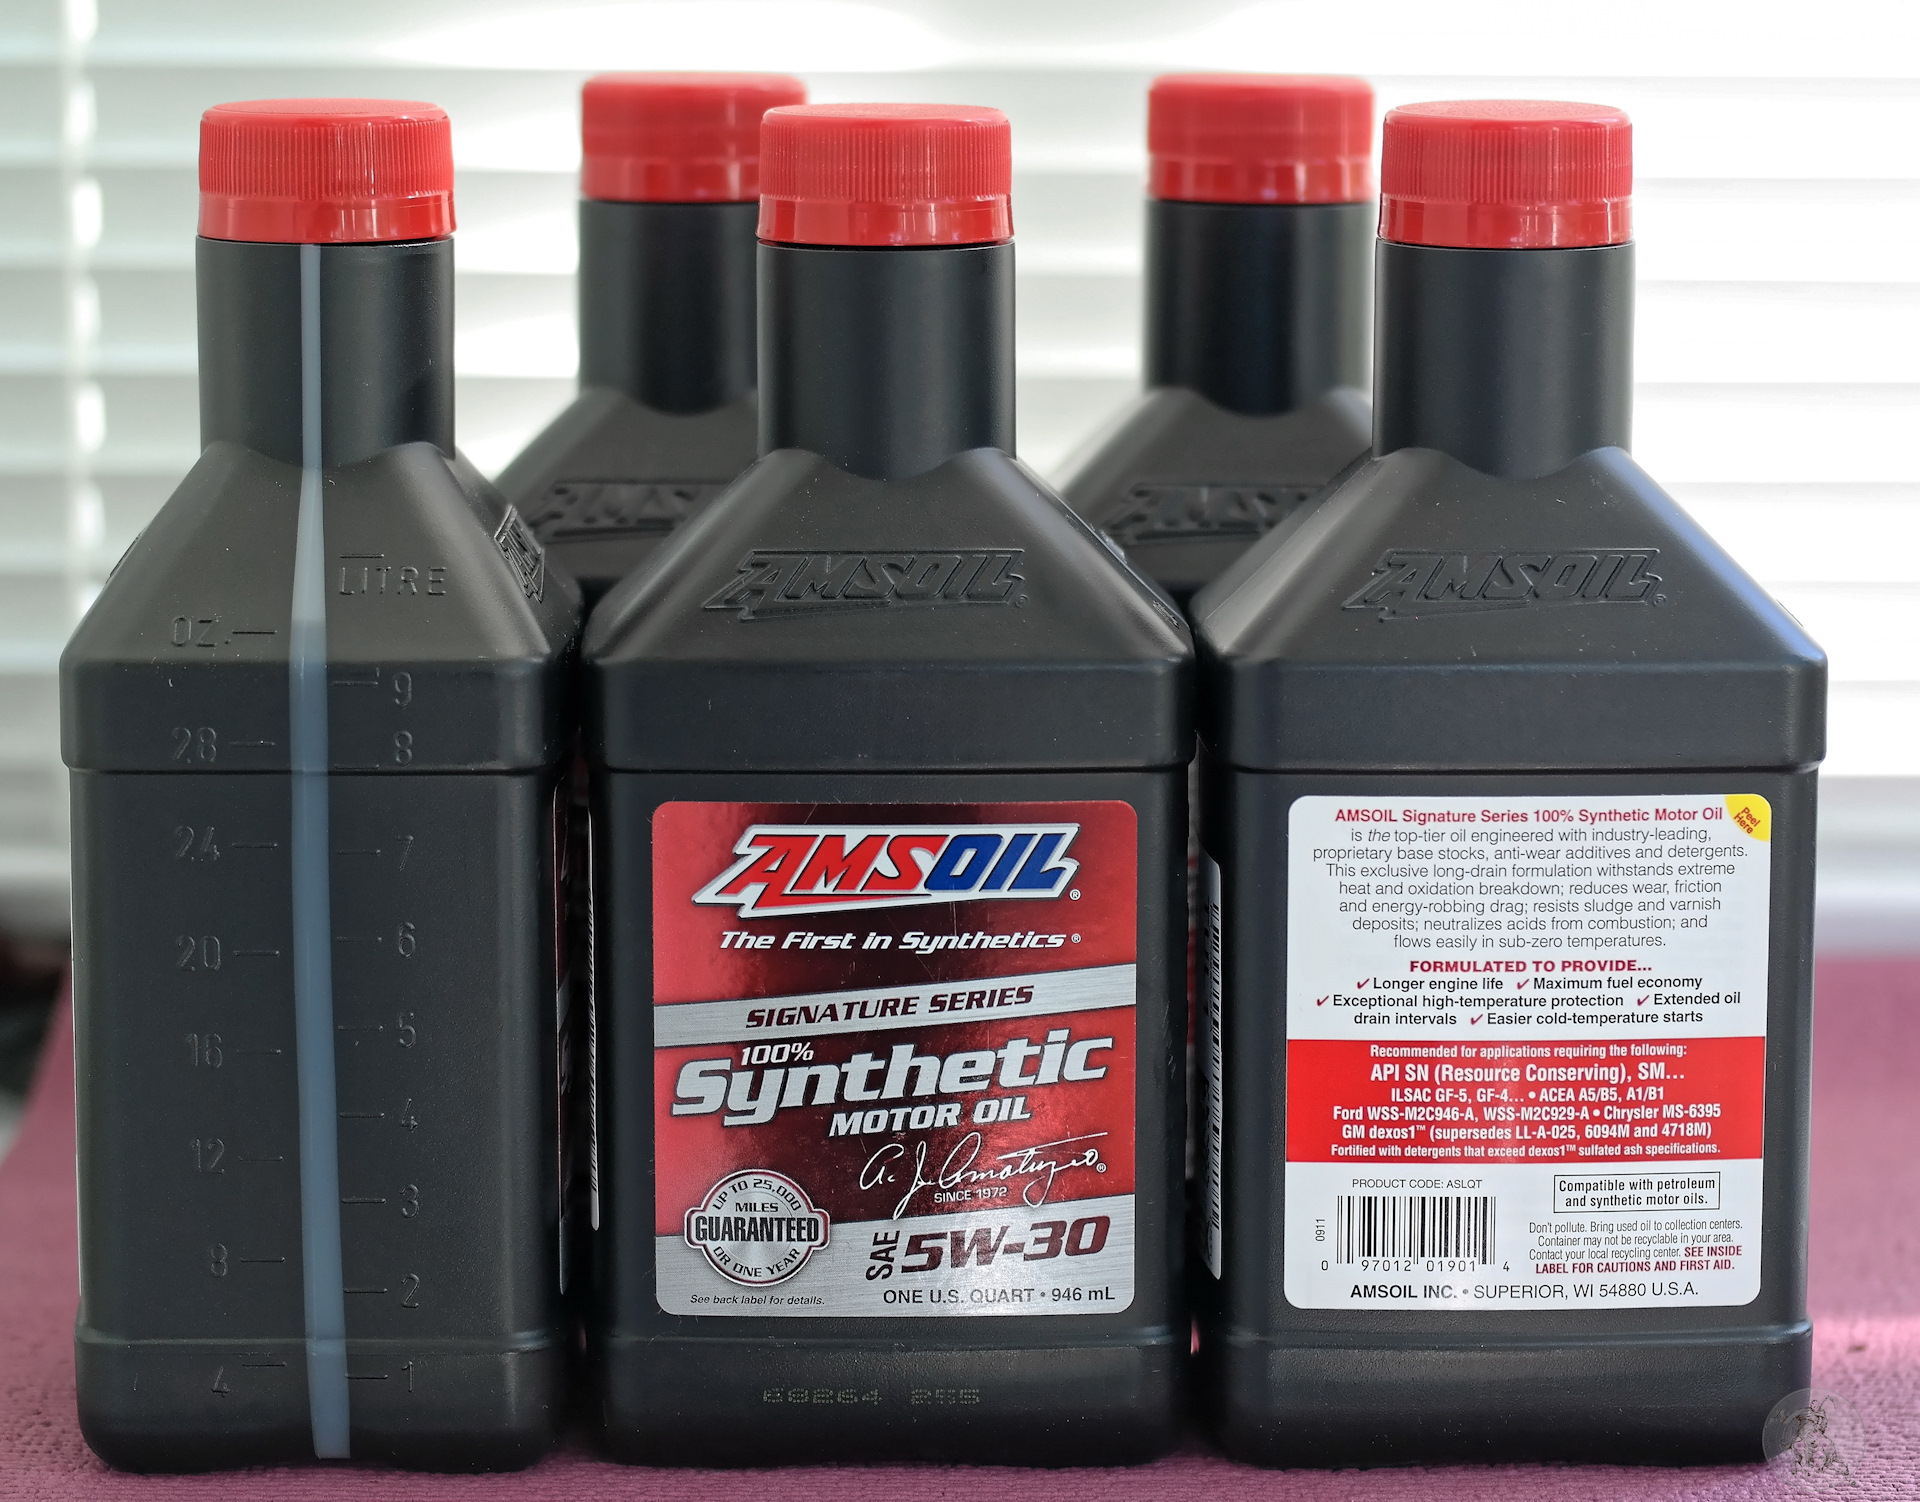 Signature series synthetic. AMSOIL SS 5w30. AMSOIL Signature Series 5w-30. Моторное масло AMSOIL 5w30. AMSOIL Signature Series Synthetic Motor Oil 5w-30.